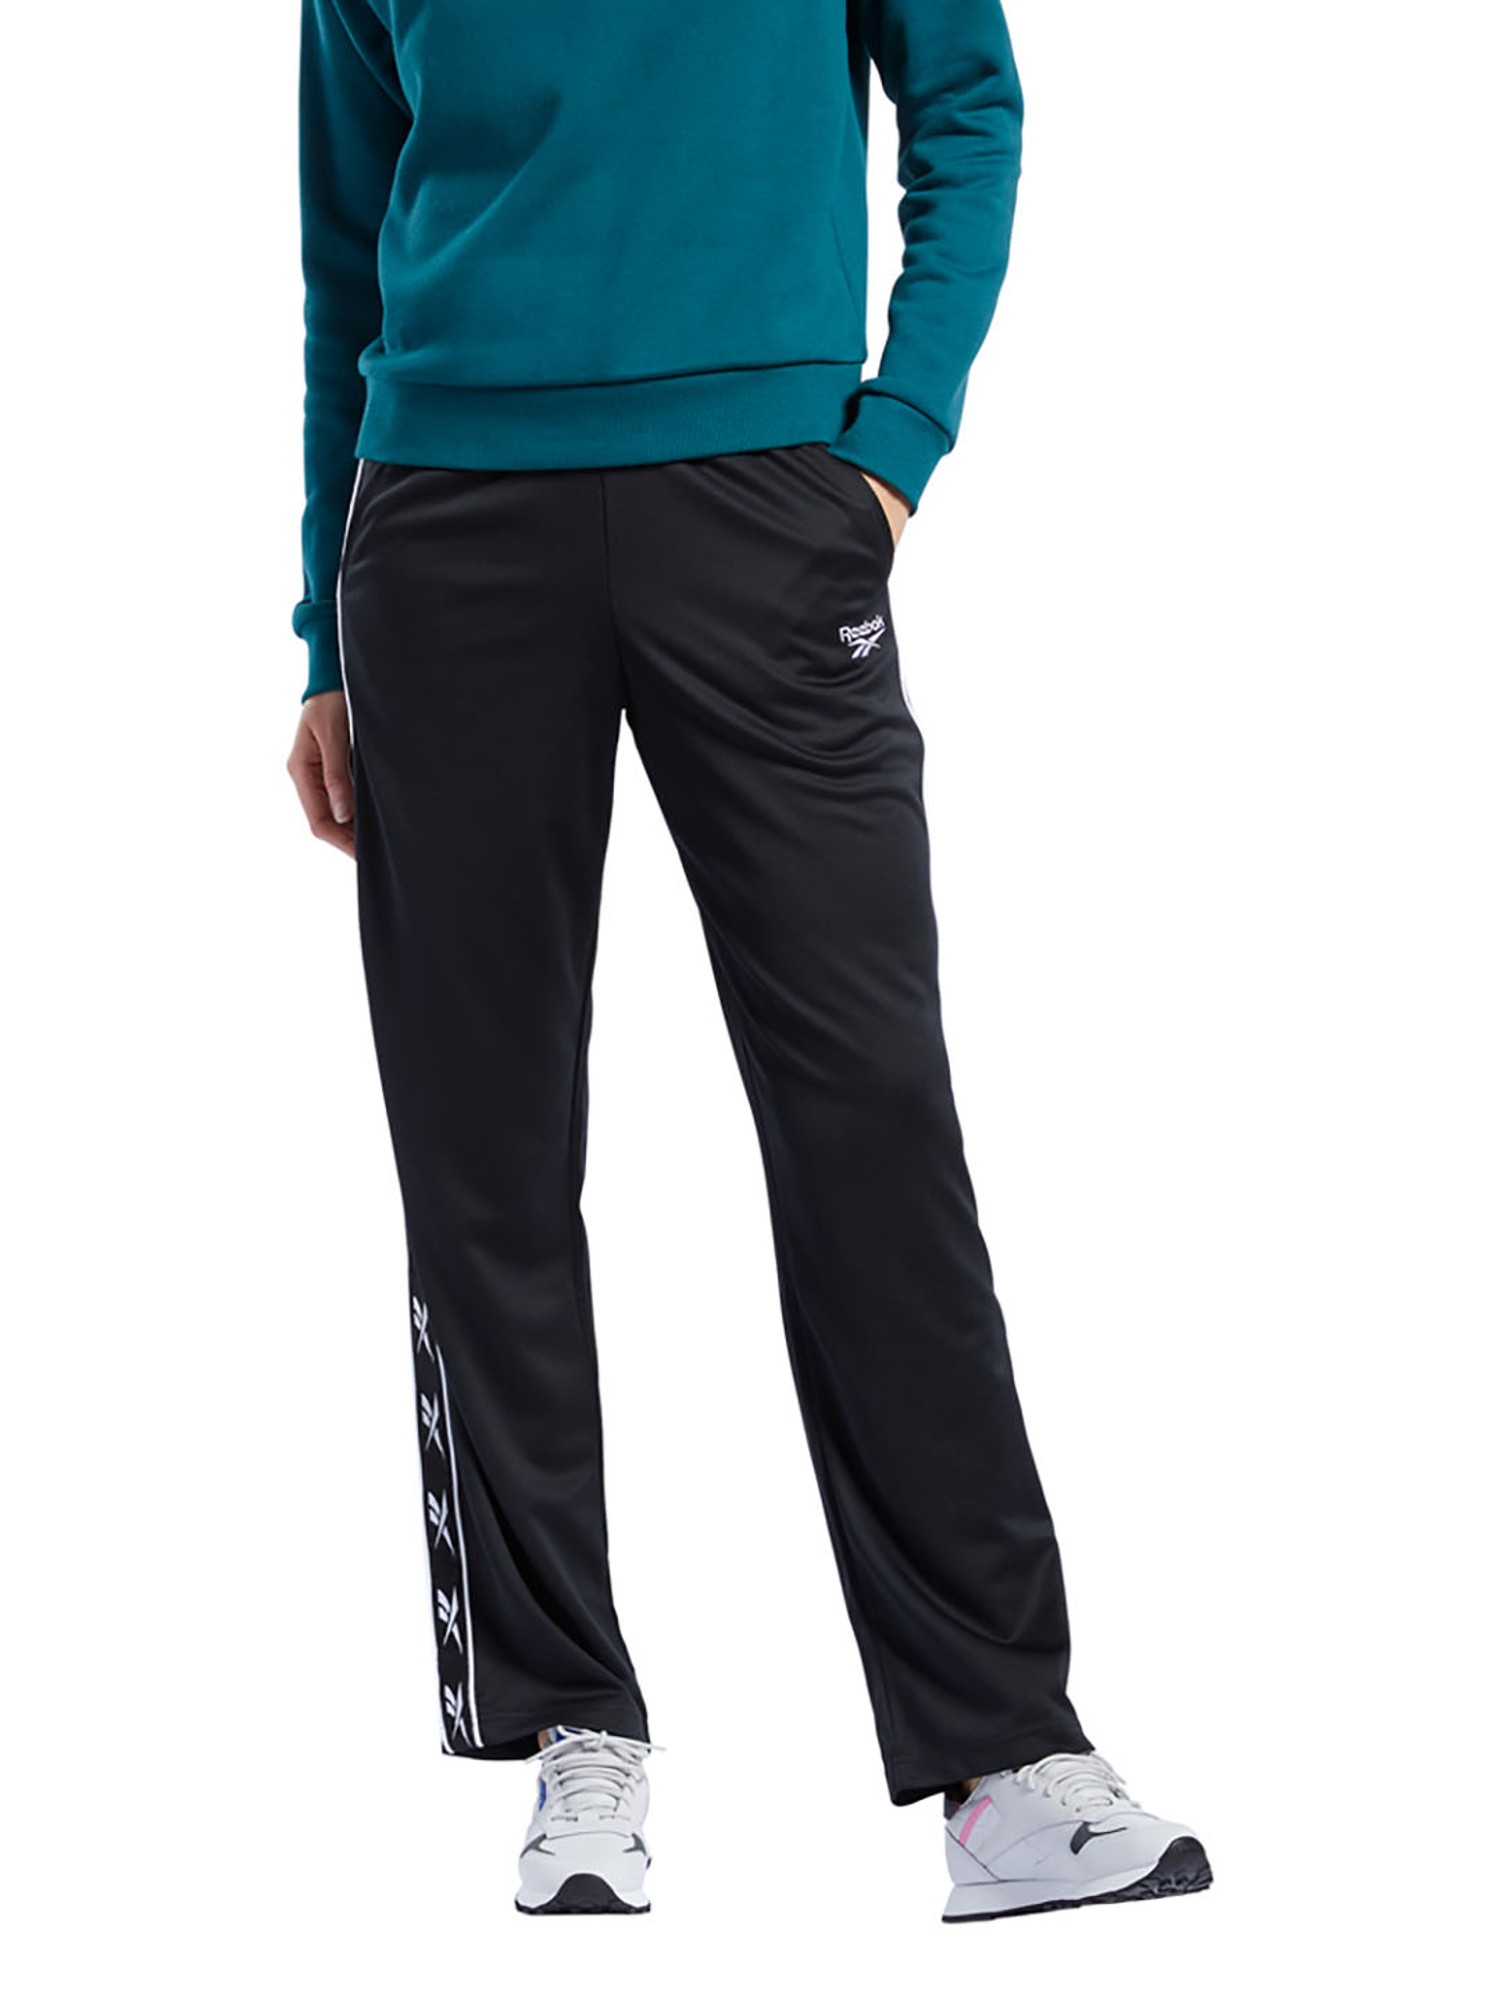 Colourblock Vector Track Pants in BLACK  MILITARY GREEN  Reebok Official  Norway